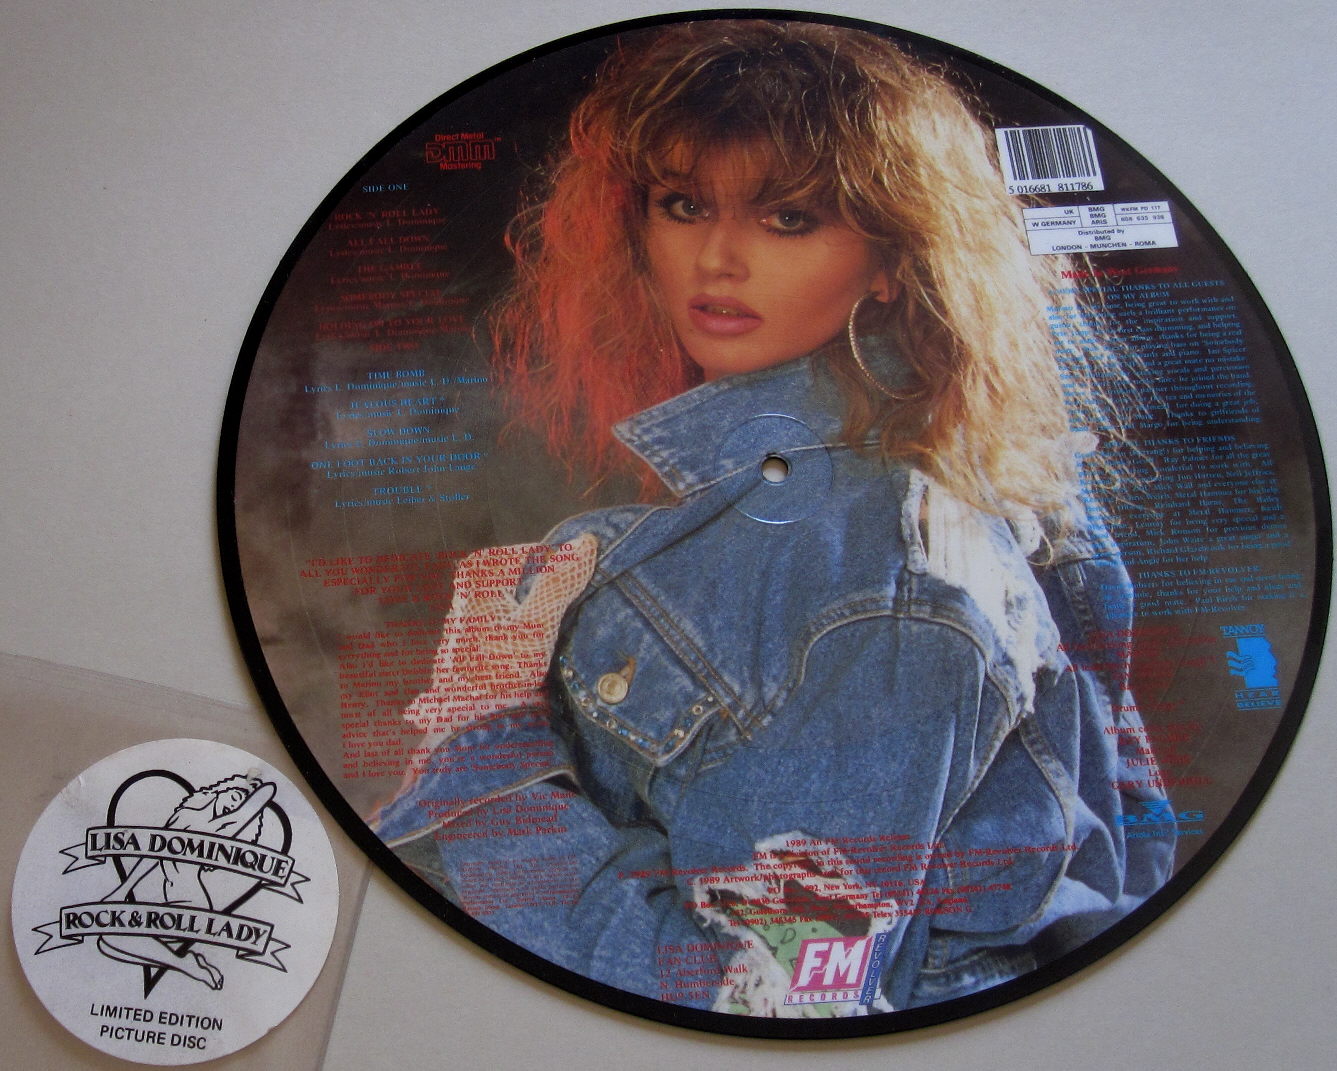  - LISA_DOMINIQUE_ROCK_AND_ROLL_LADY_PICTURE_DISC_LP